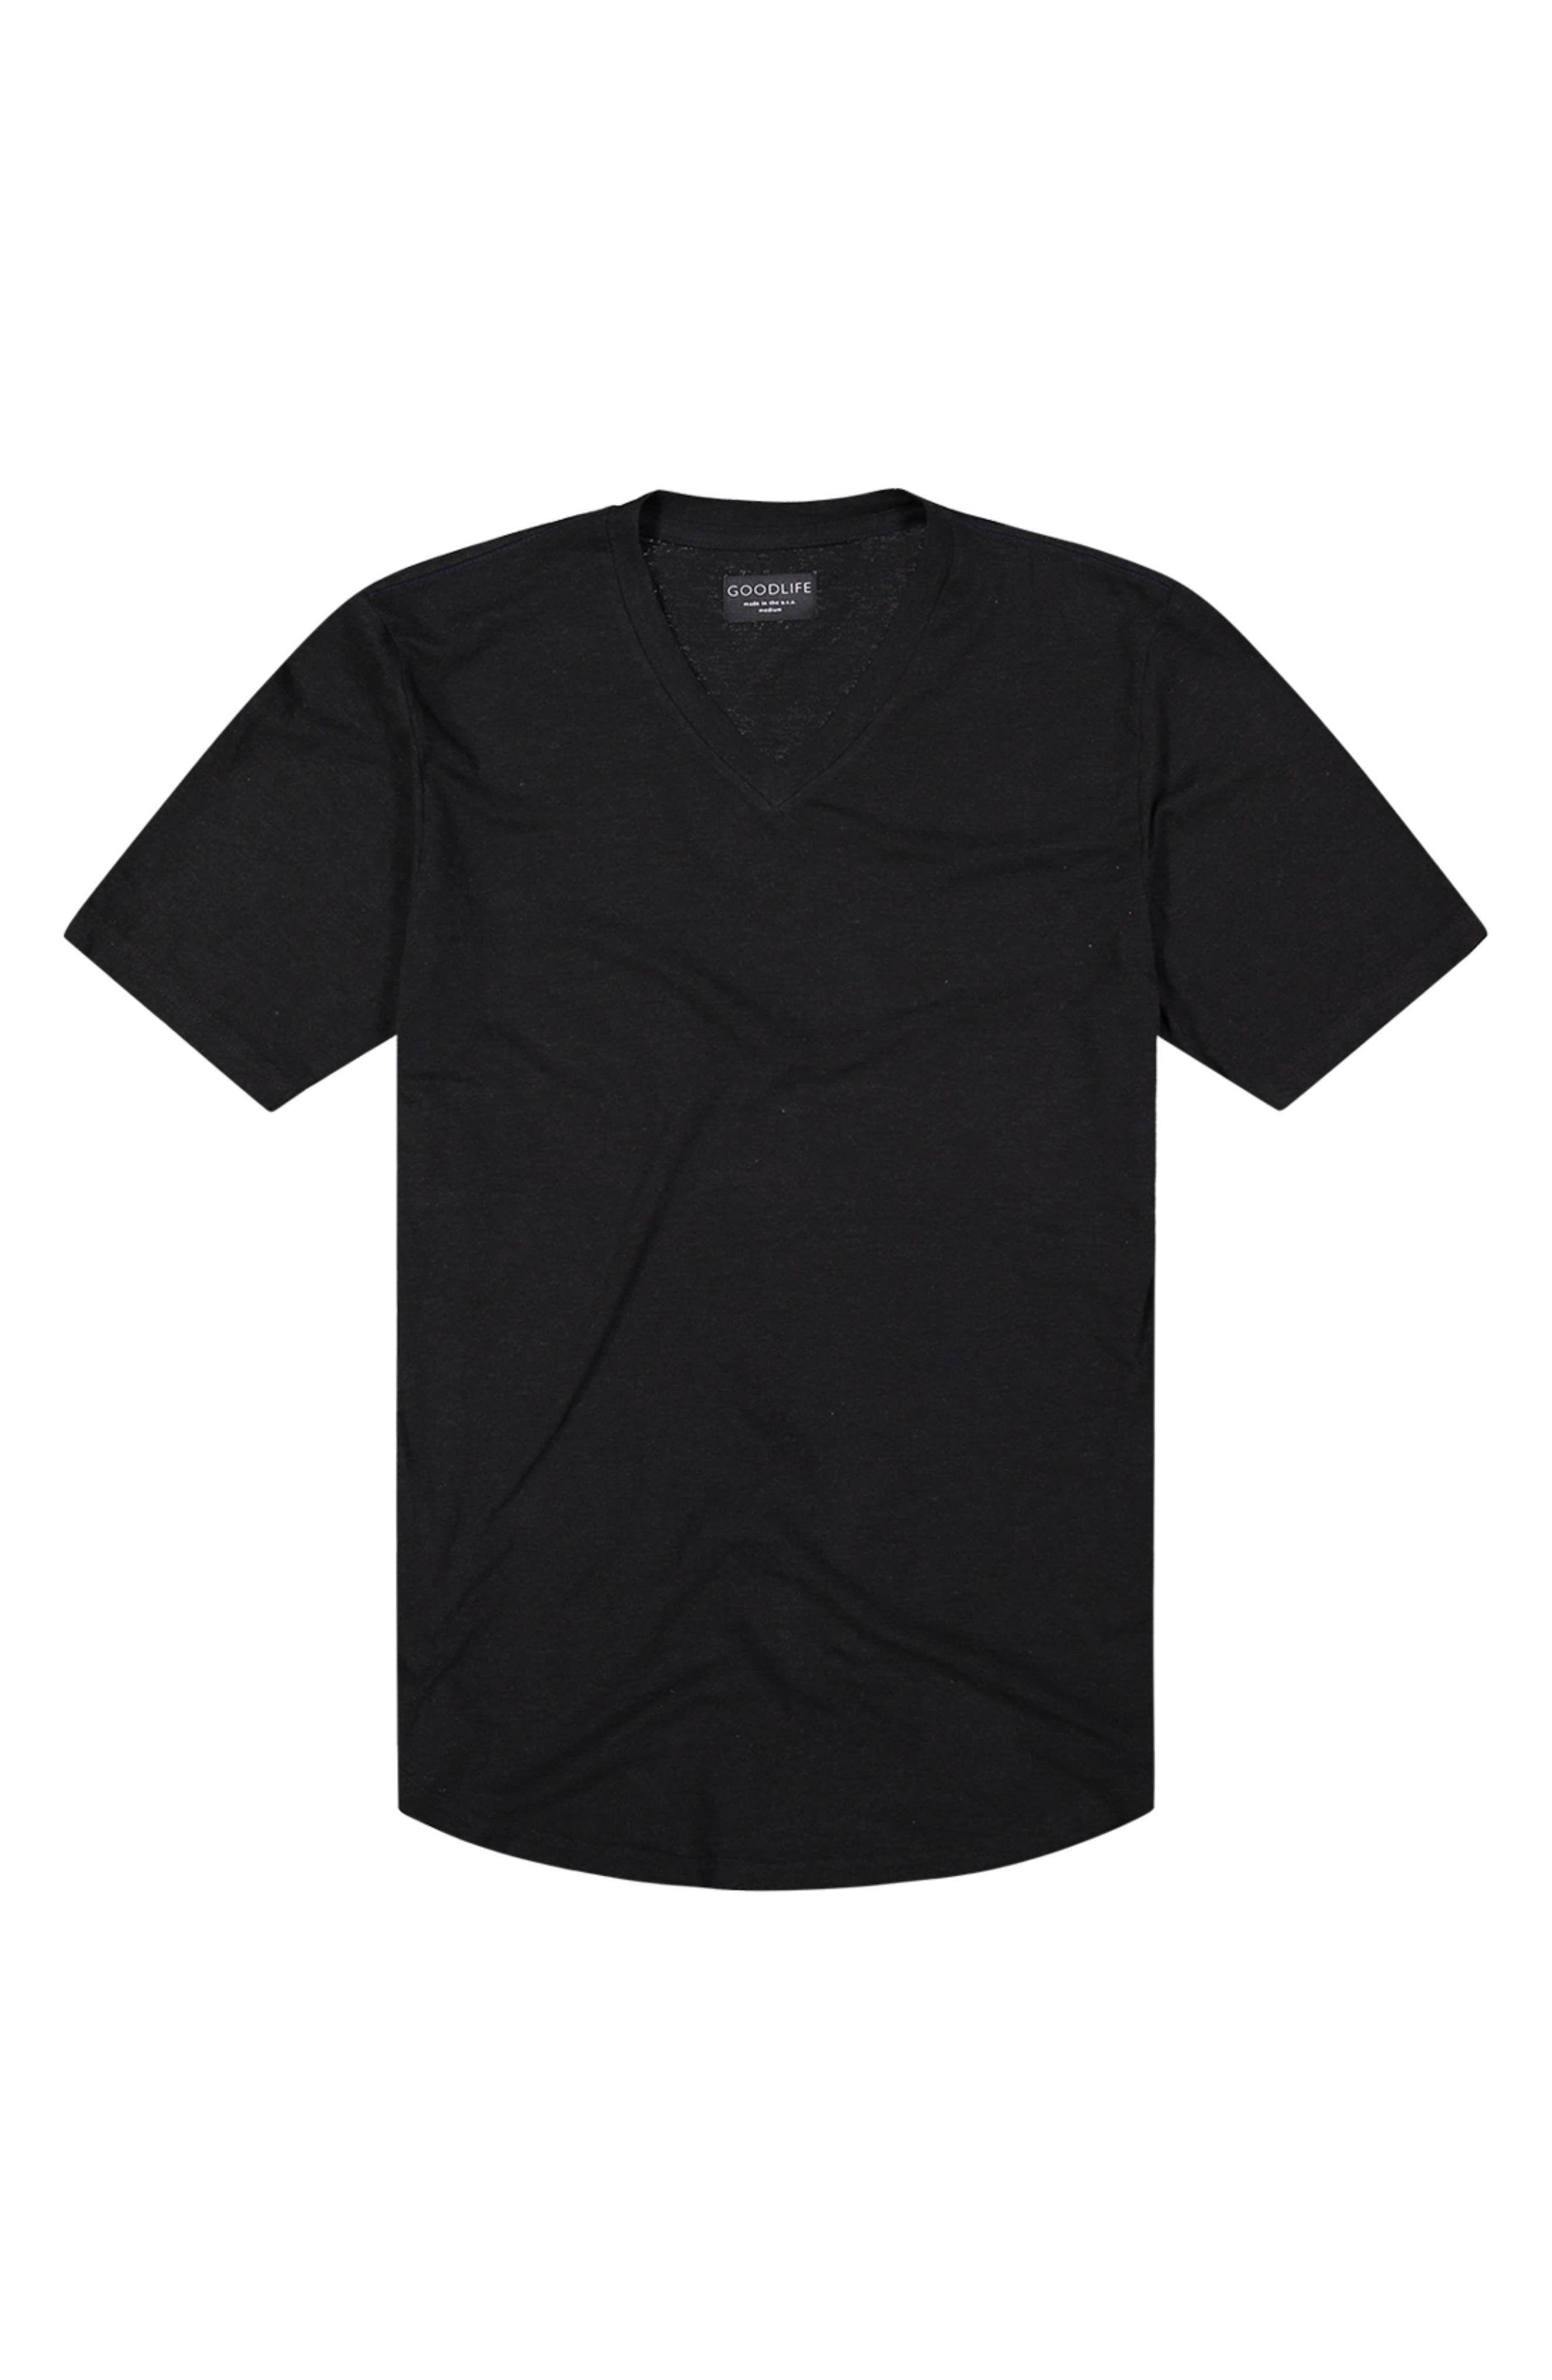 Goodlife Scallop T-shirt In Black